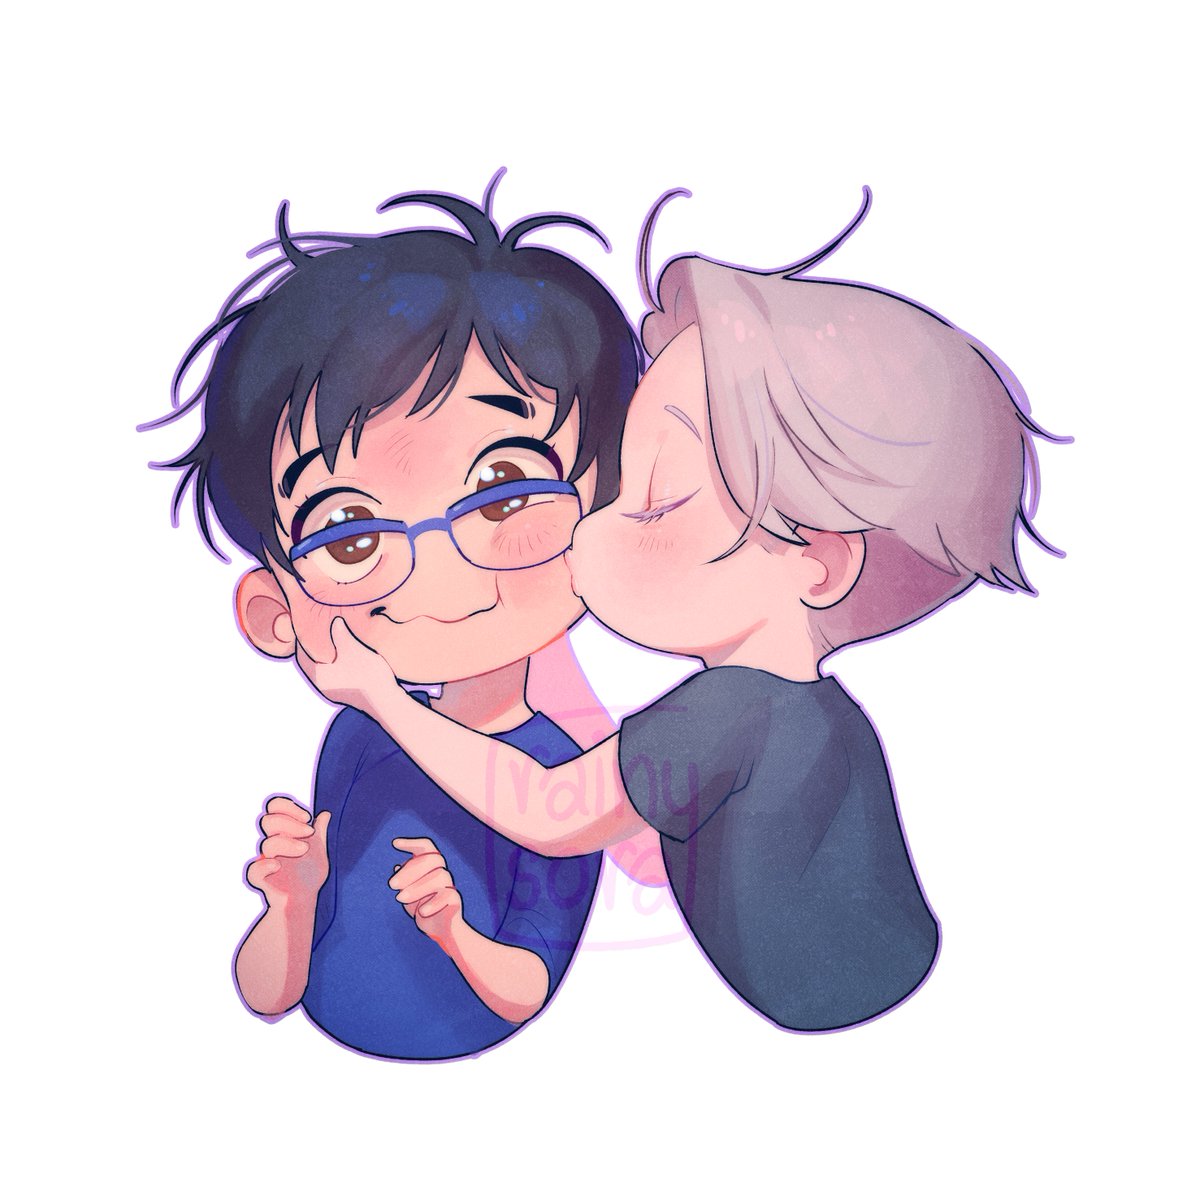 I've missed themmm #yurionice